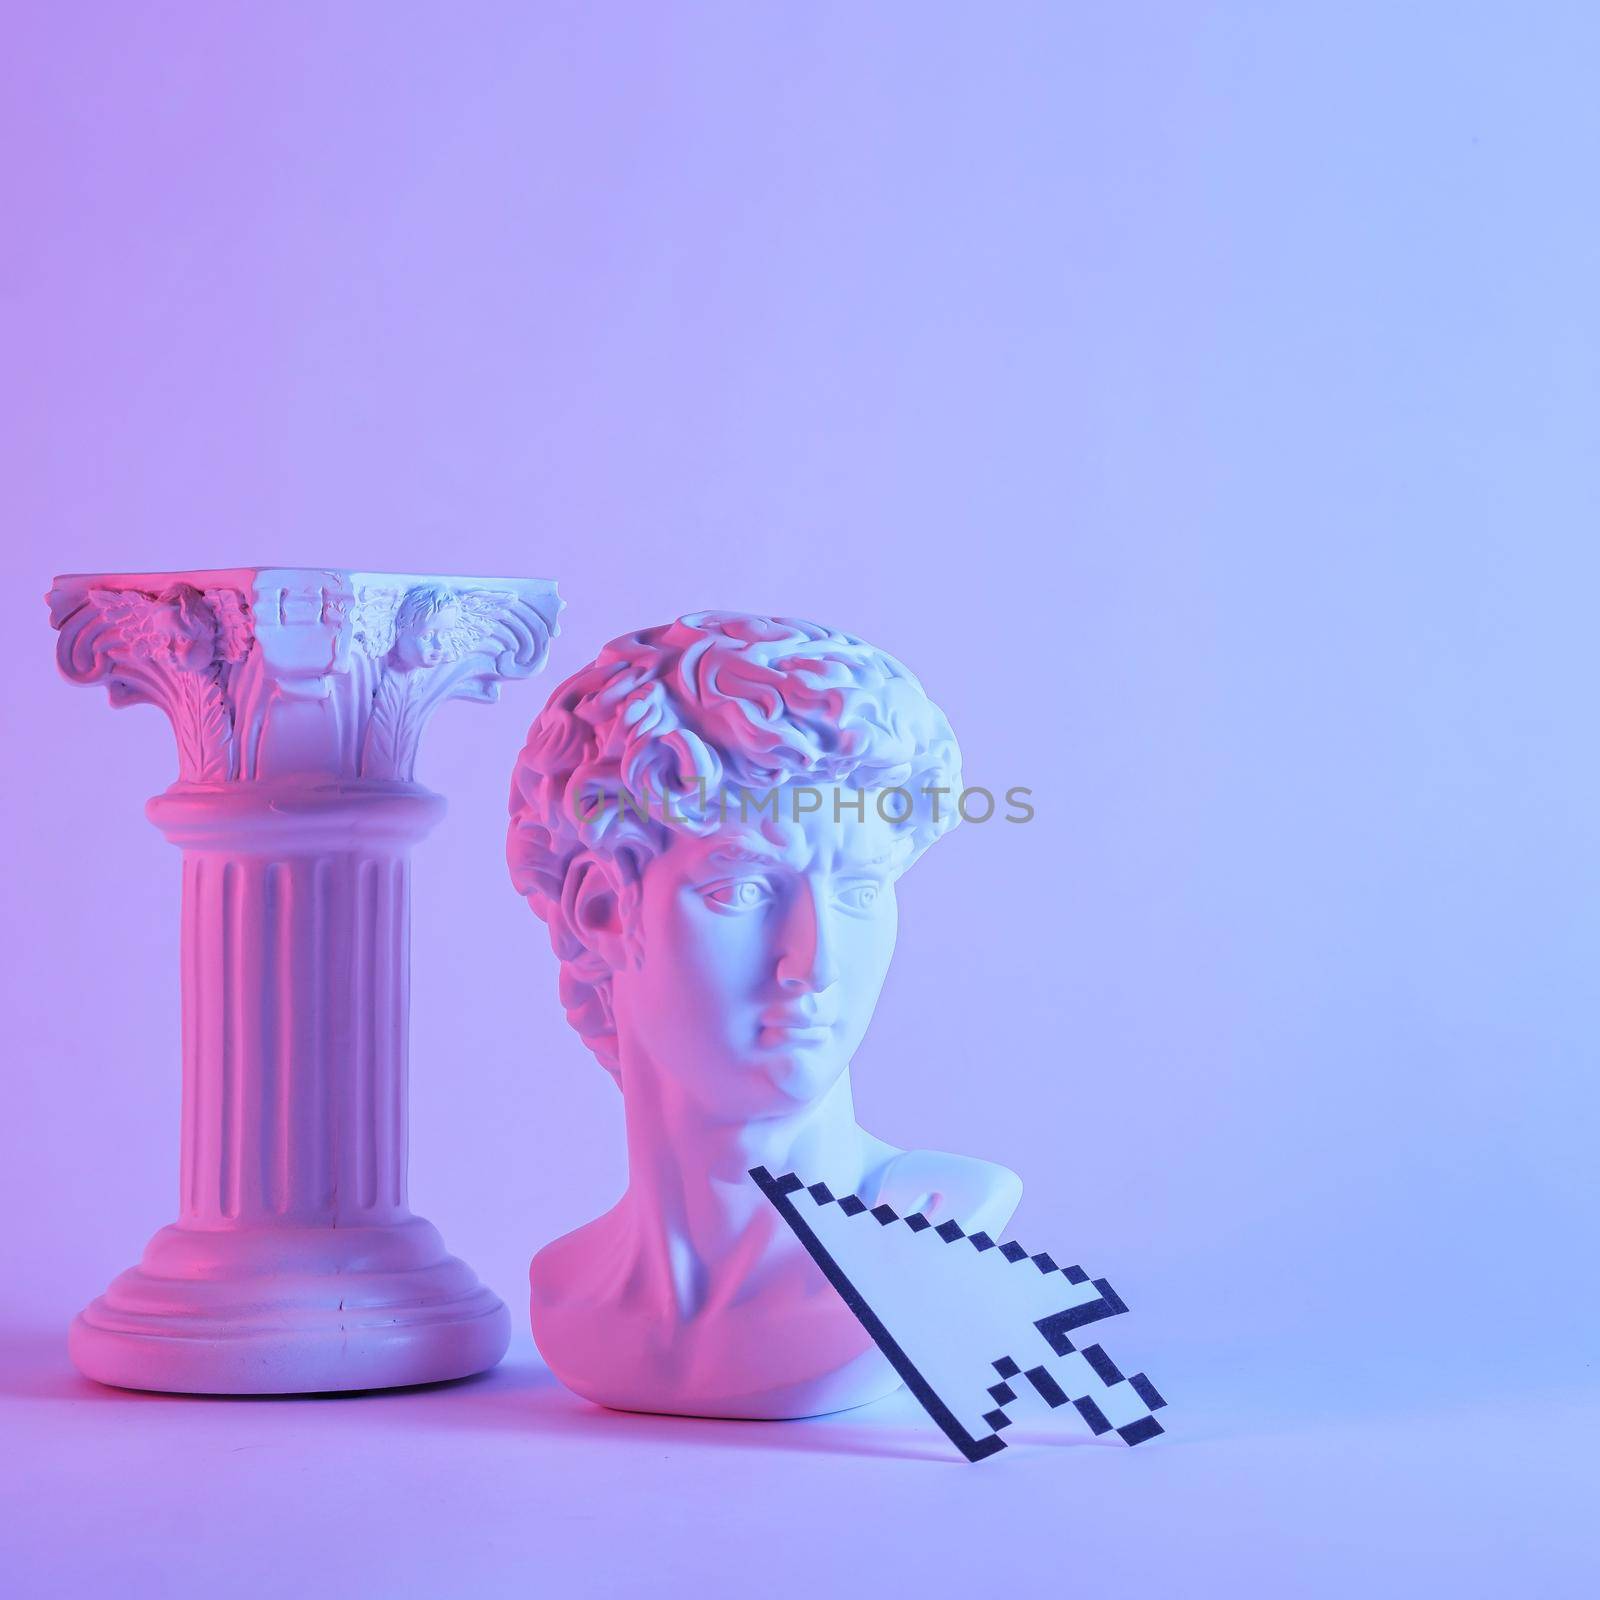 Antique style bust of young Grecian or Roman man with pedestal standing side by side over a purple monotone background